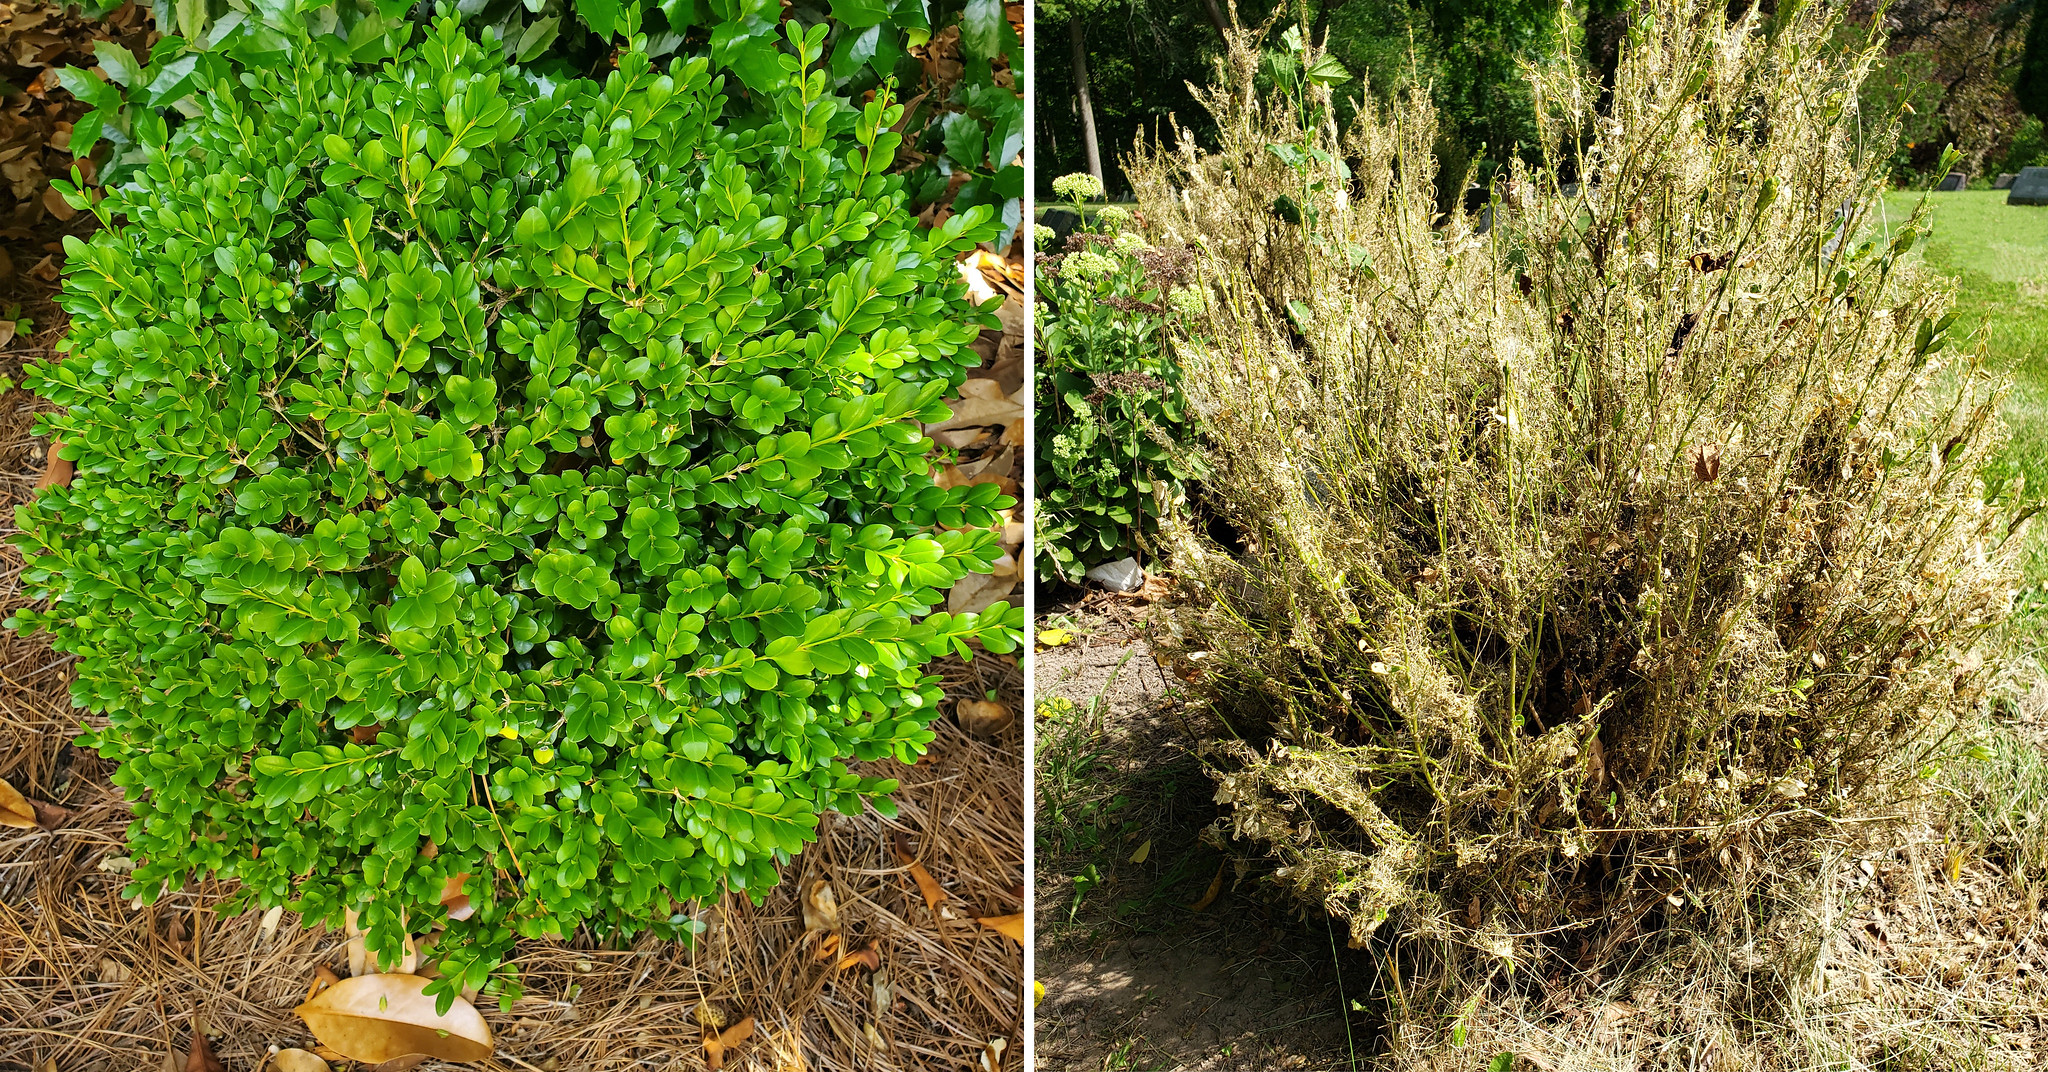 Healthy boxwood on left, infested boxwood with damage on right.